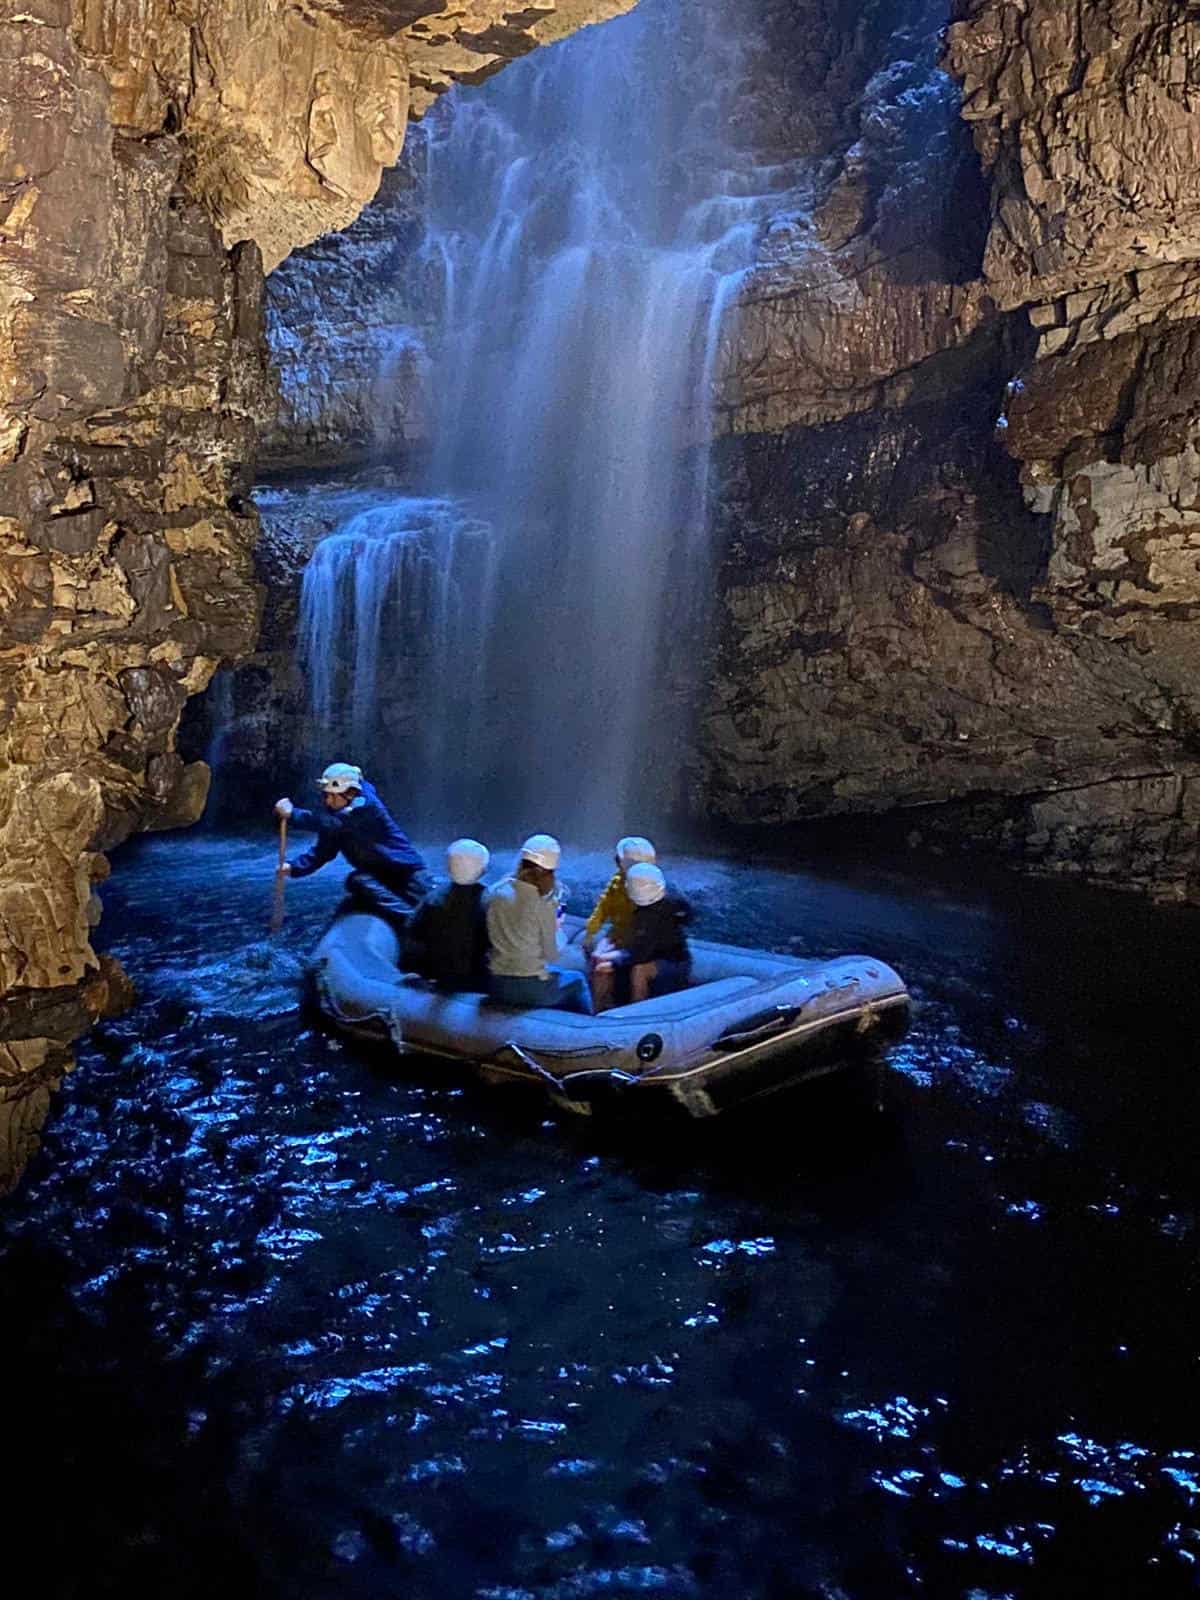 Smoocavetours are looking for staff for the busy season ahead. If your interested in working in Smoo Cave this year send me your cv at frasereadie@btinternet.com. I need a receptionist to organise the tours and a tour guide. Ideal job for geology students. Full training given.